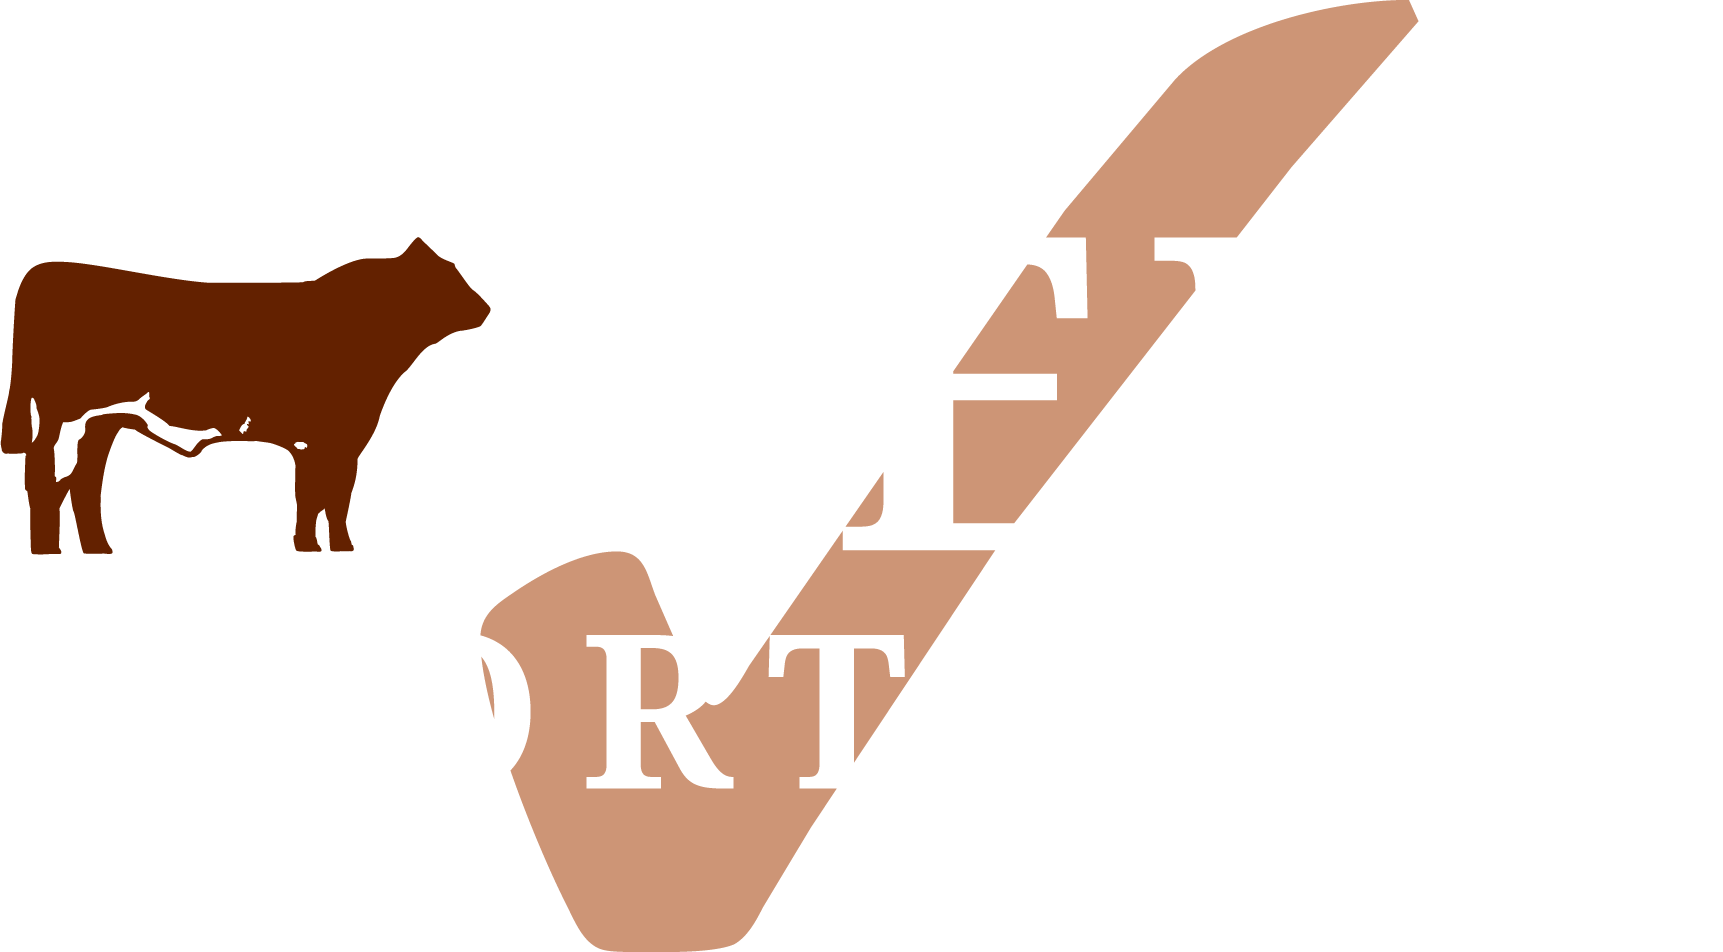 The Beef Shorthorn Cattle Society